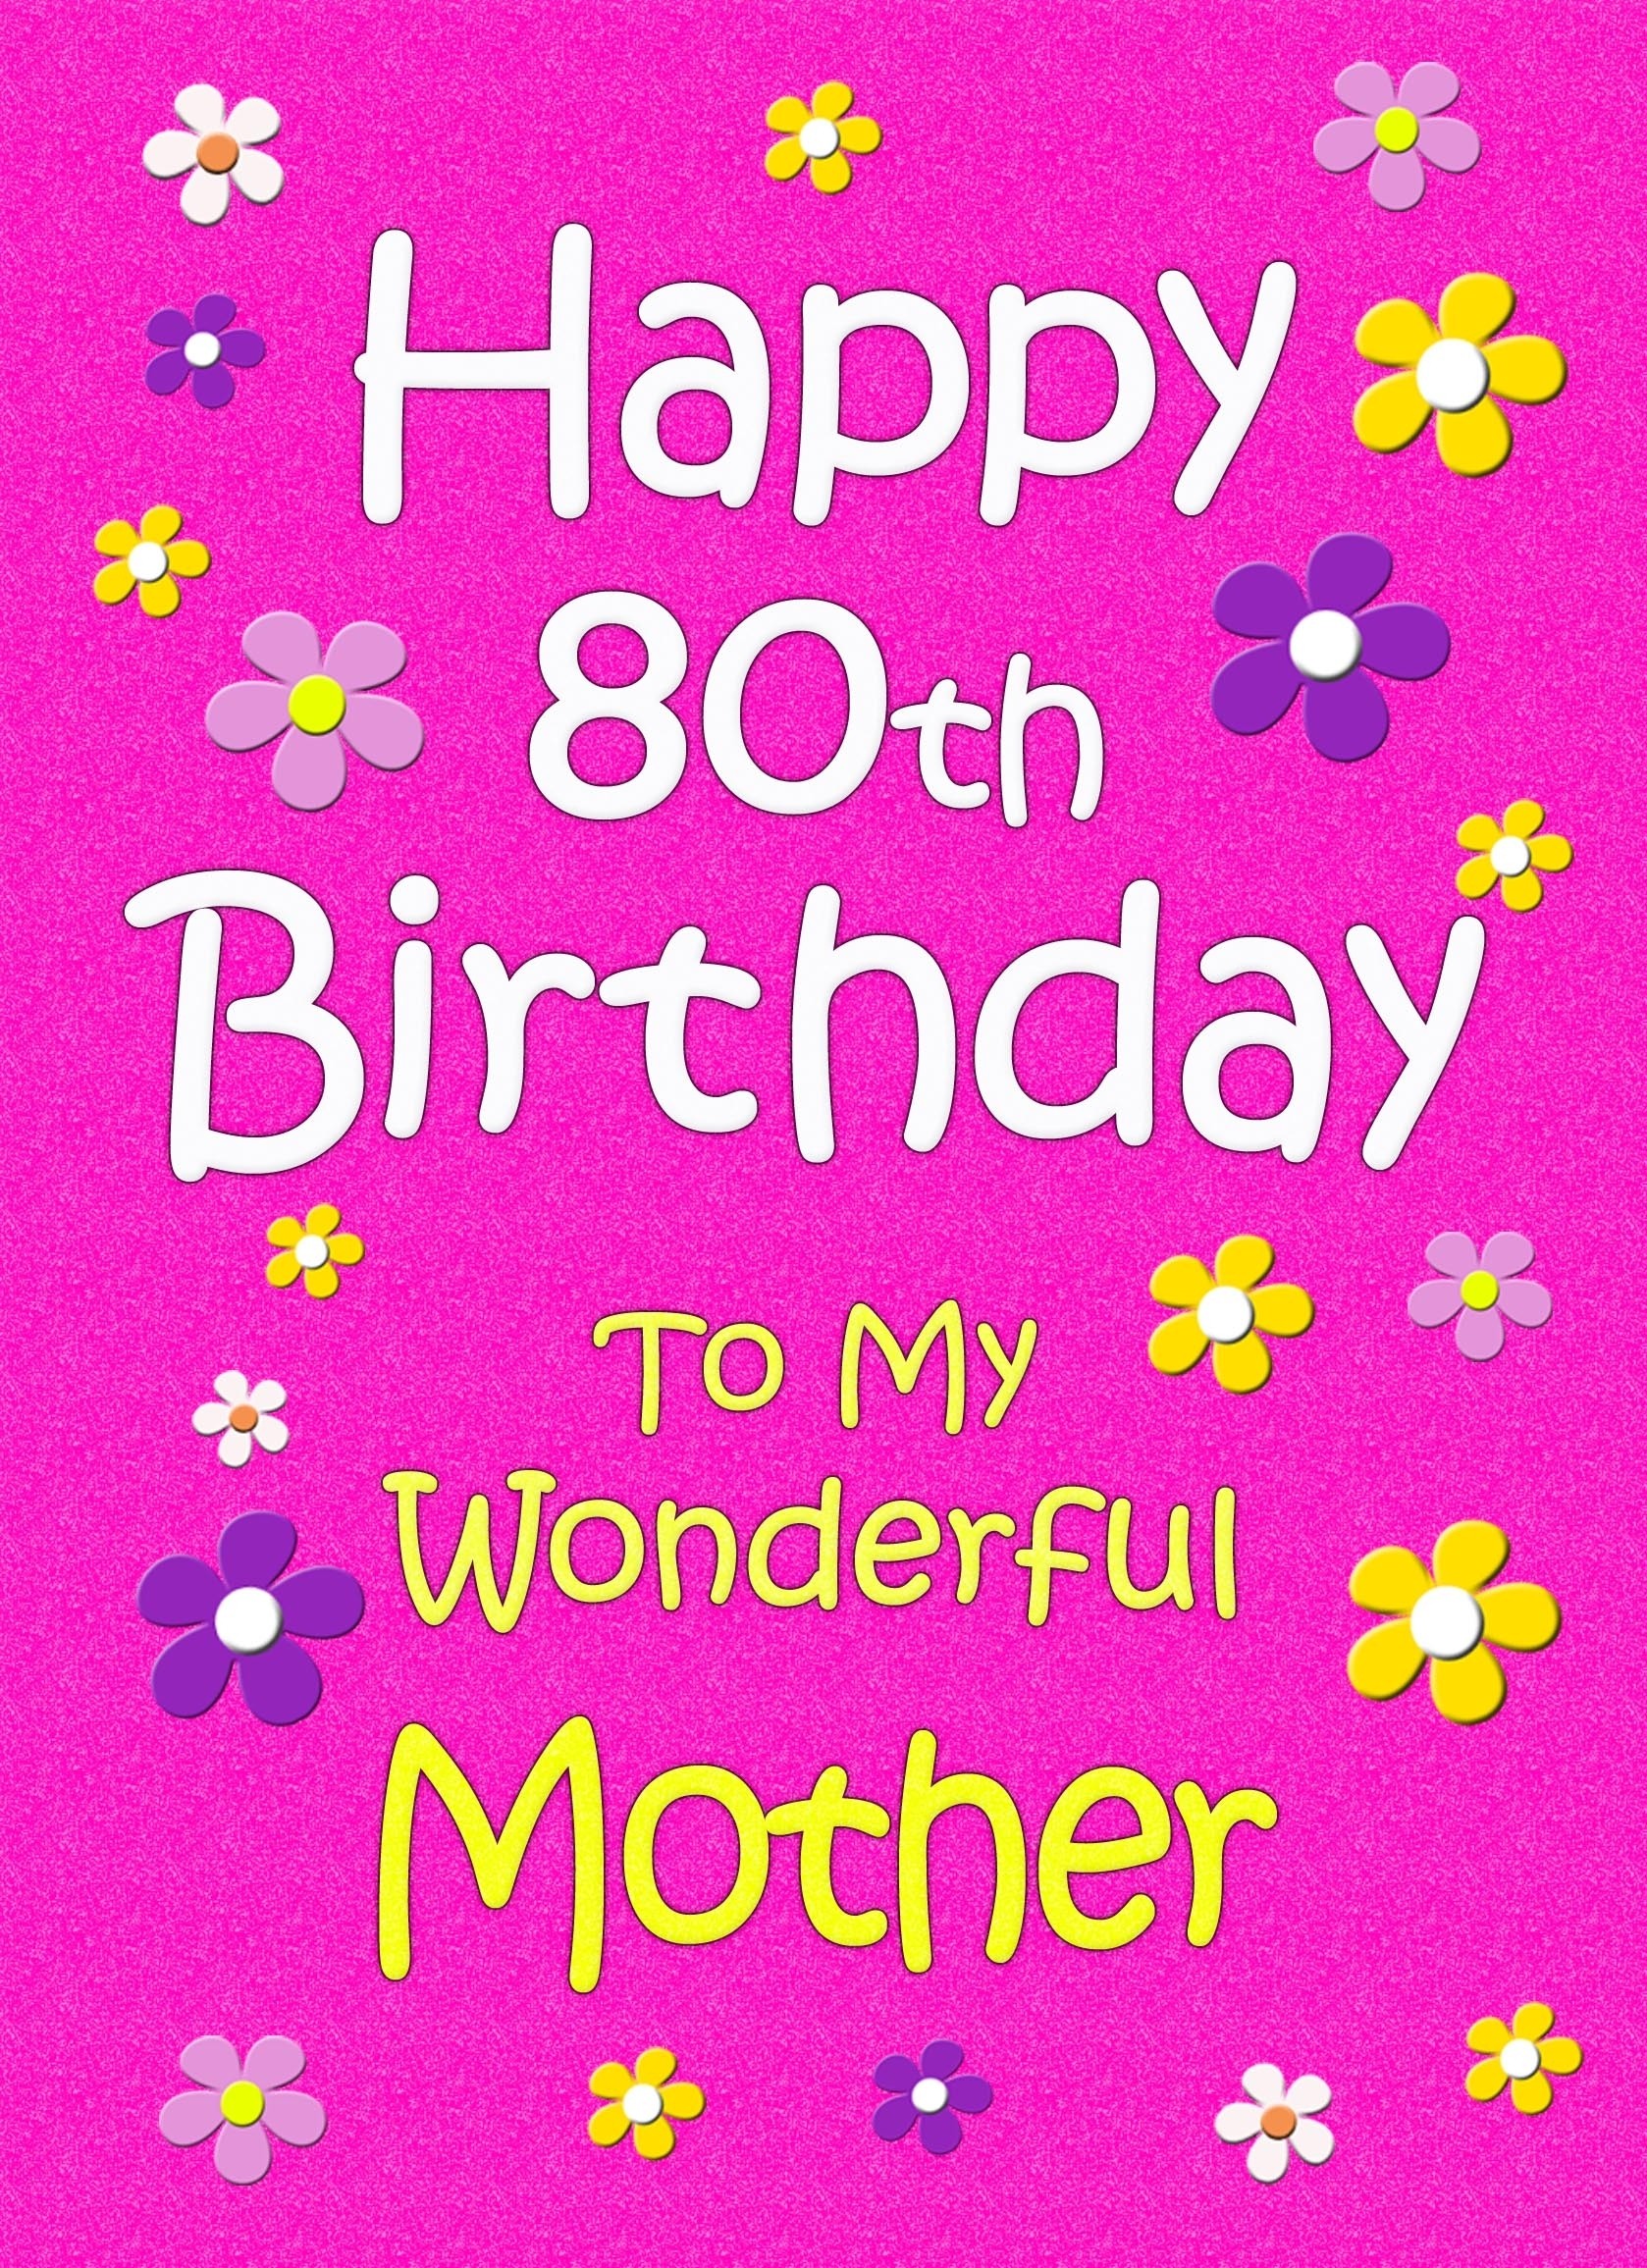 Mother 80th Birthday Card (Pink)